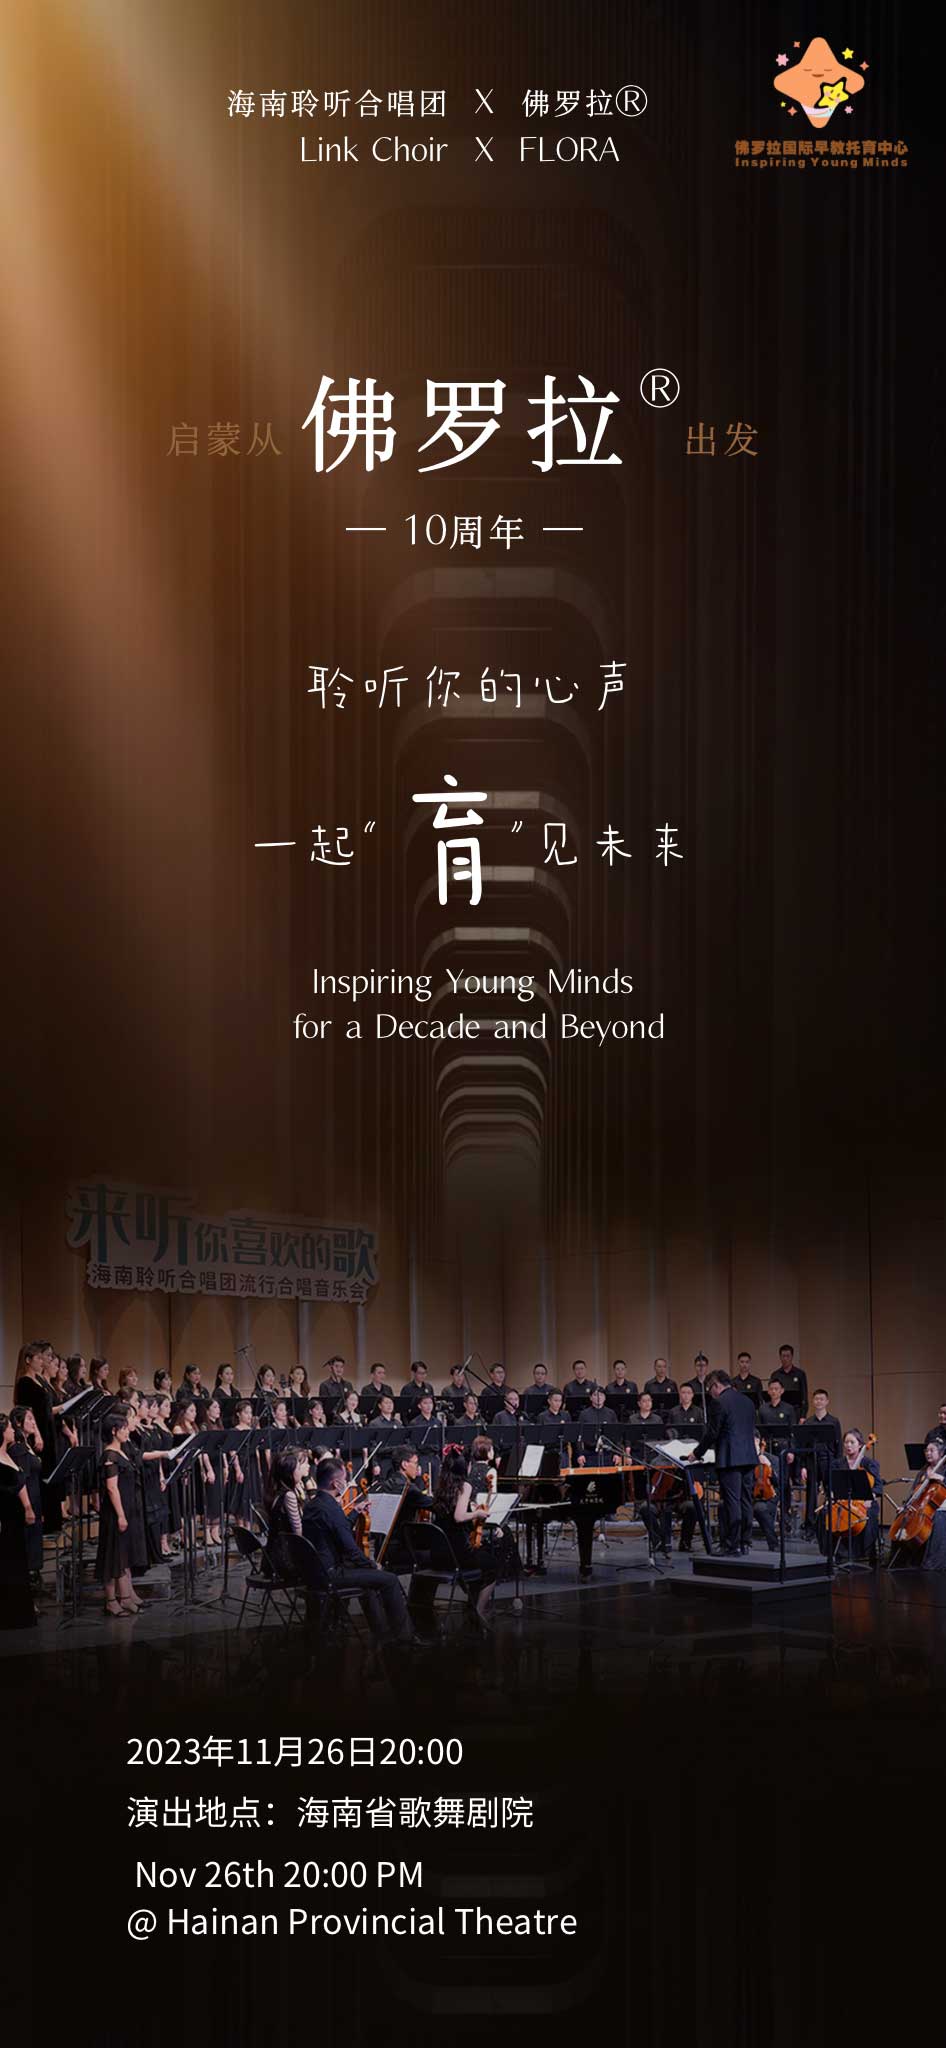 Exclusive Offer: Free Tickets to a Memorable Evening with the Hainan Harmony Choir